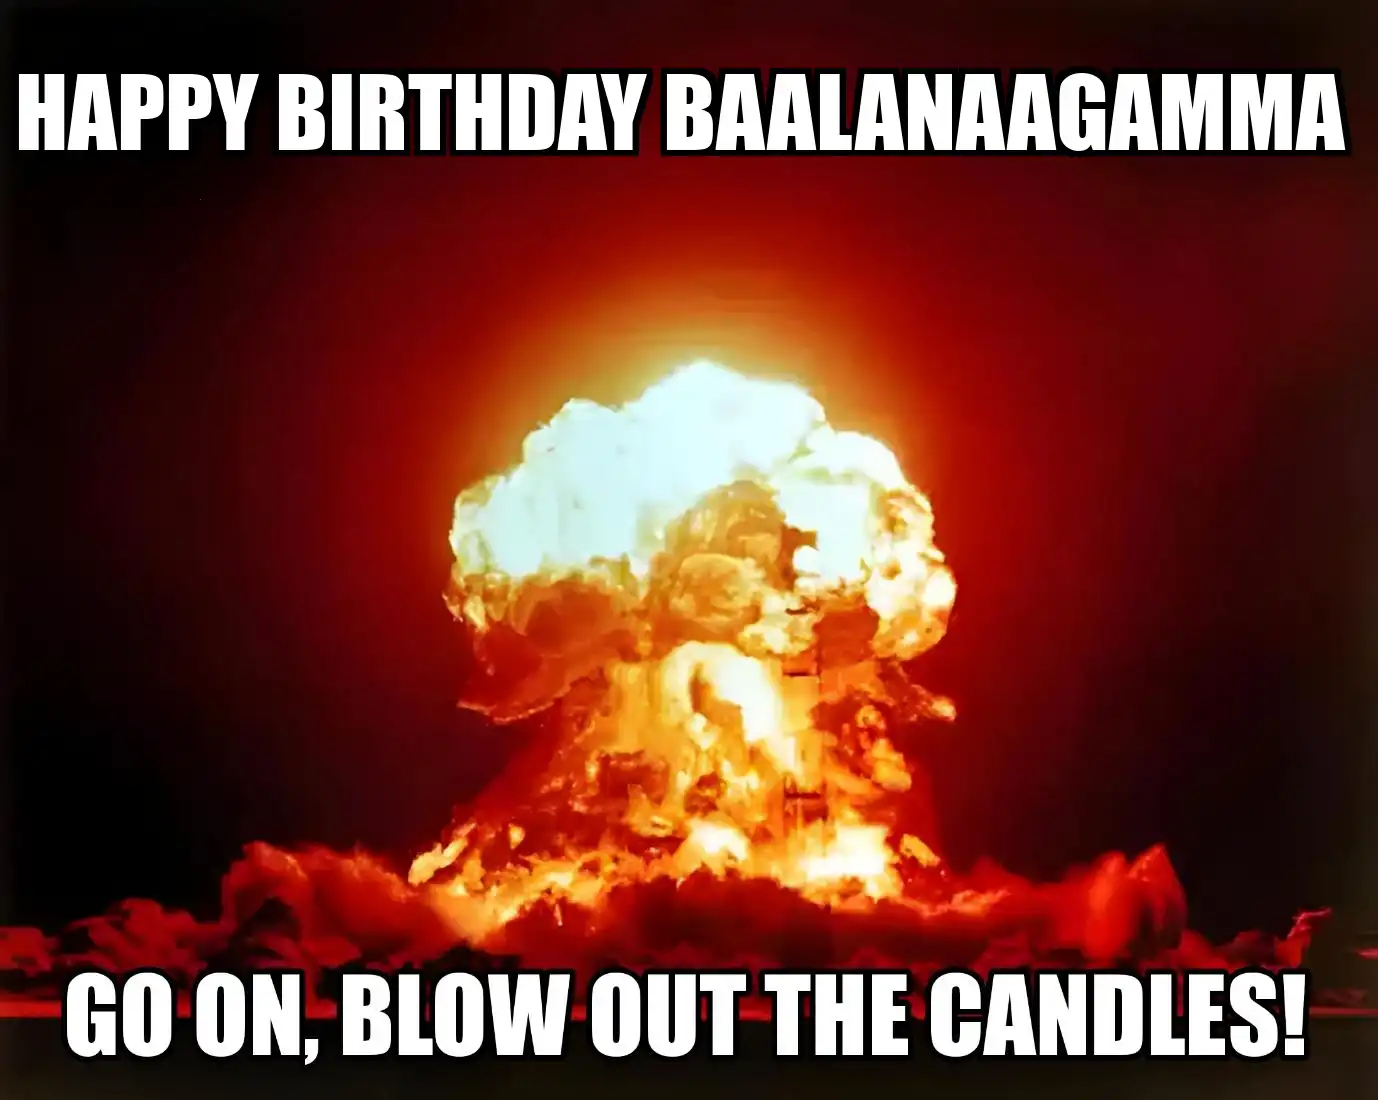 Happy Birthday Baalanaagamma Go On Blow Out The Candles Meme